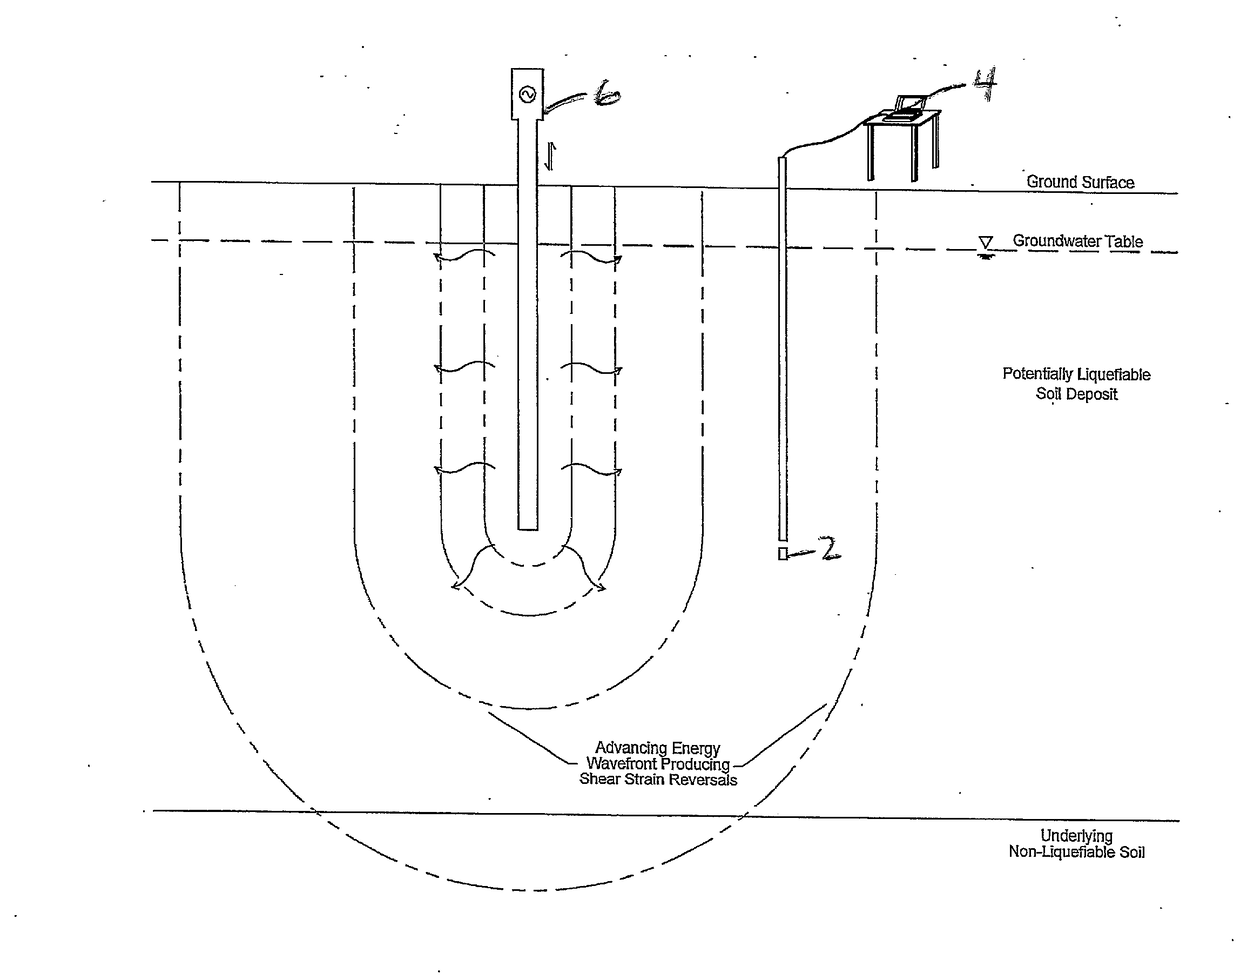 Method of soil liquefaction testing and remediation